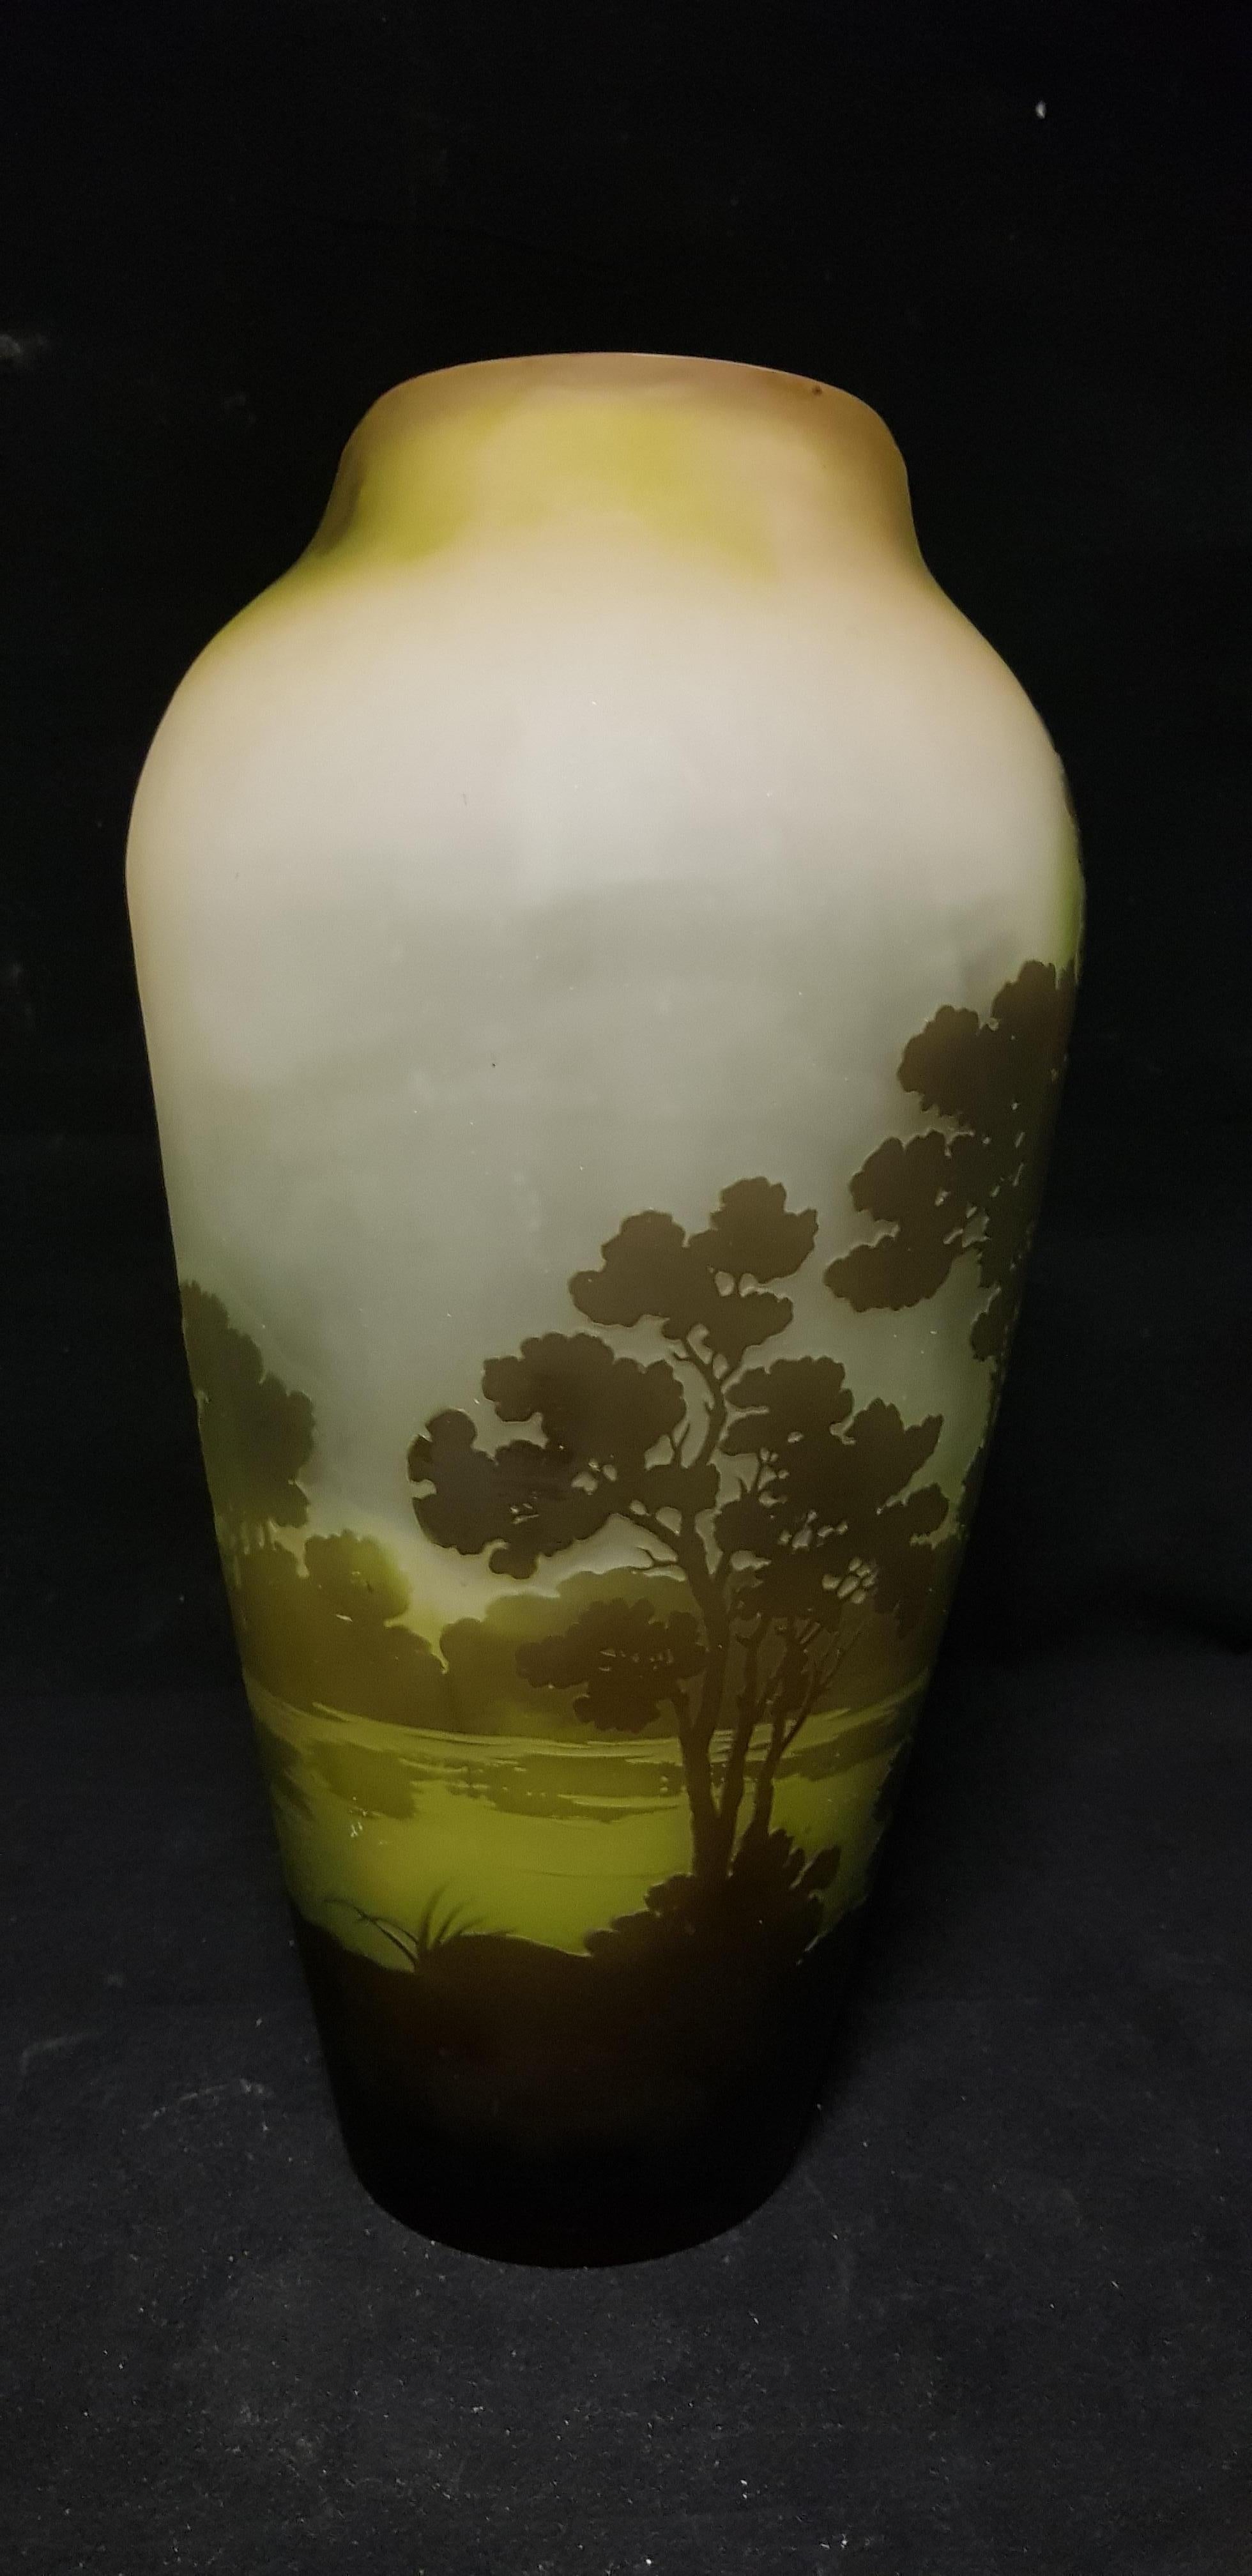 Glass vase with decoration of the lake landscape in the colors of green and brown
signed
Same form is published on art signed 